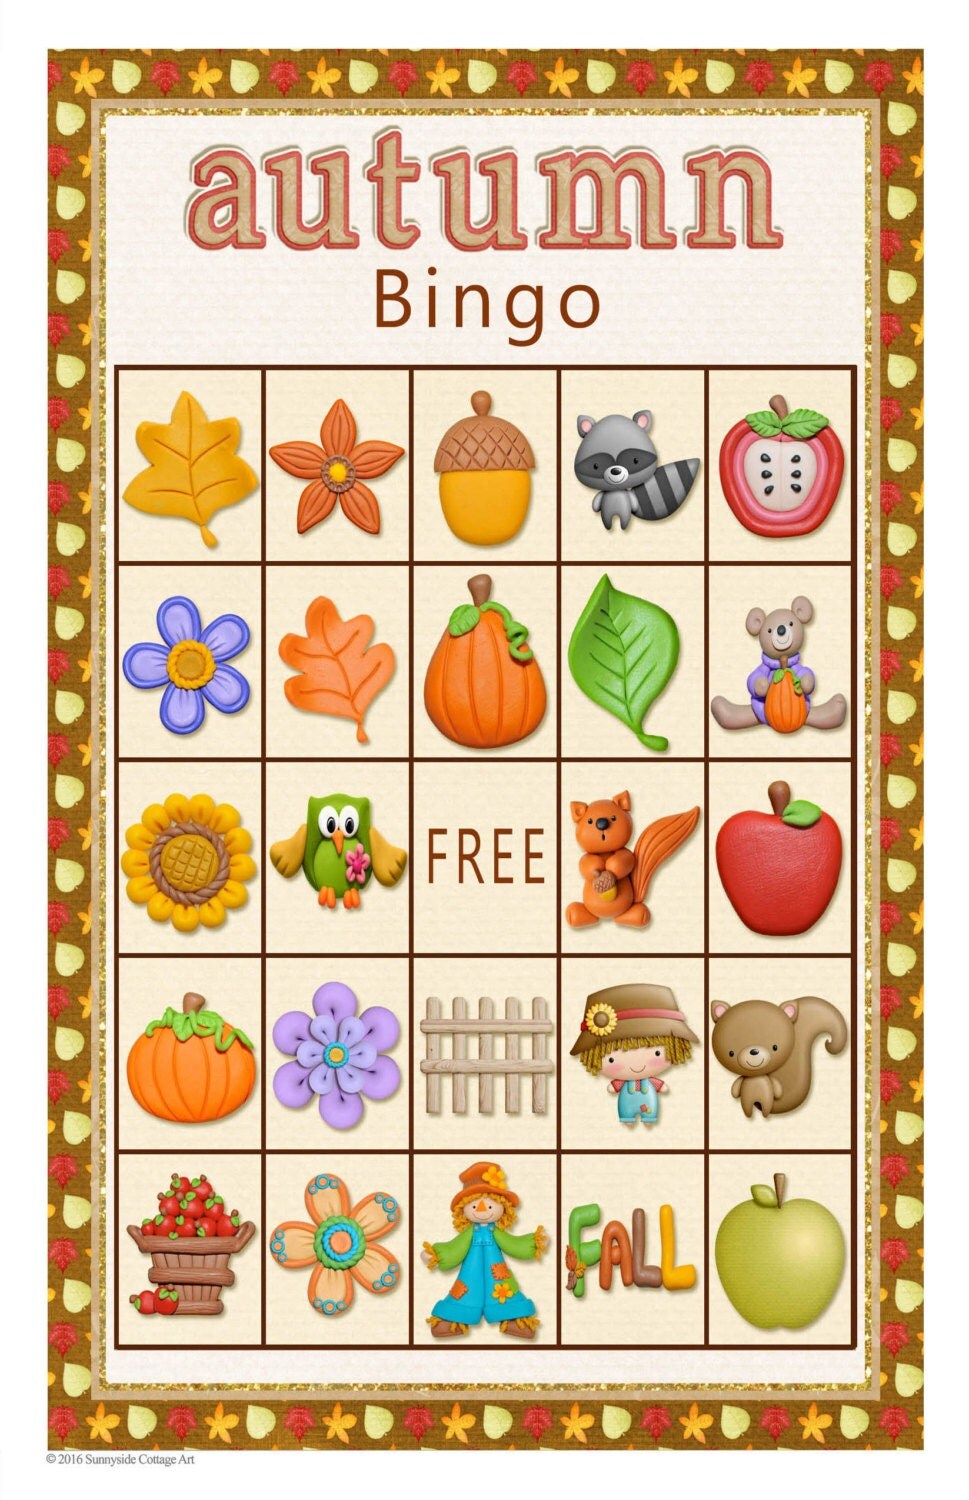 Bingo and Memory Game Fall/Autumn theme in golds and russet